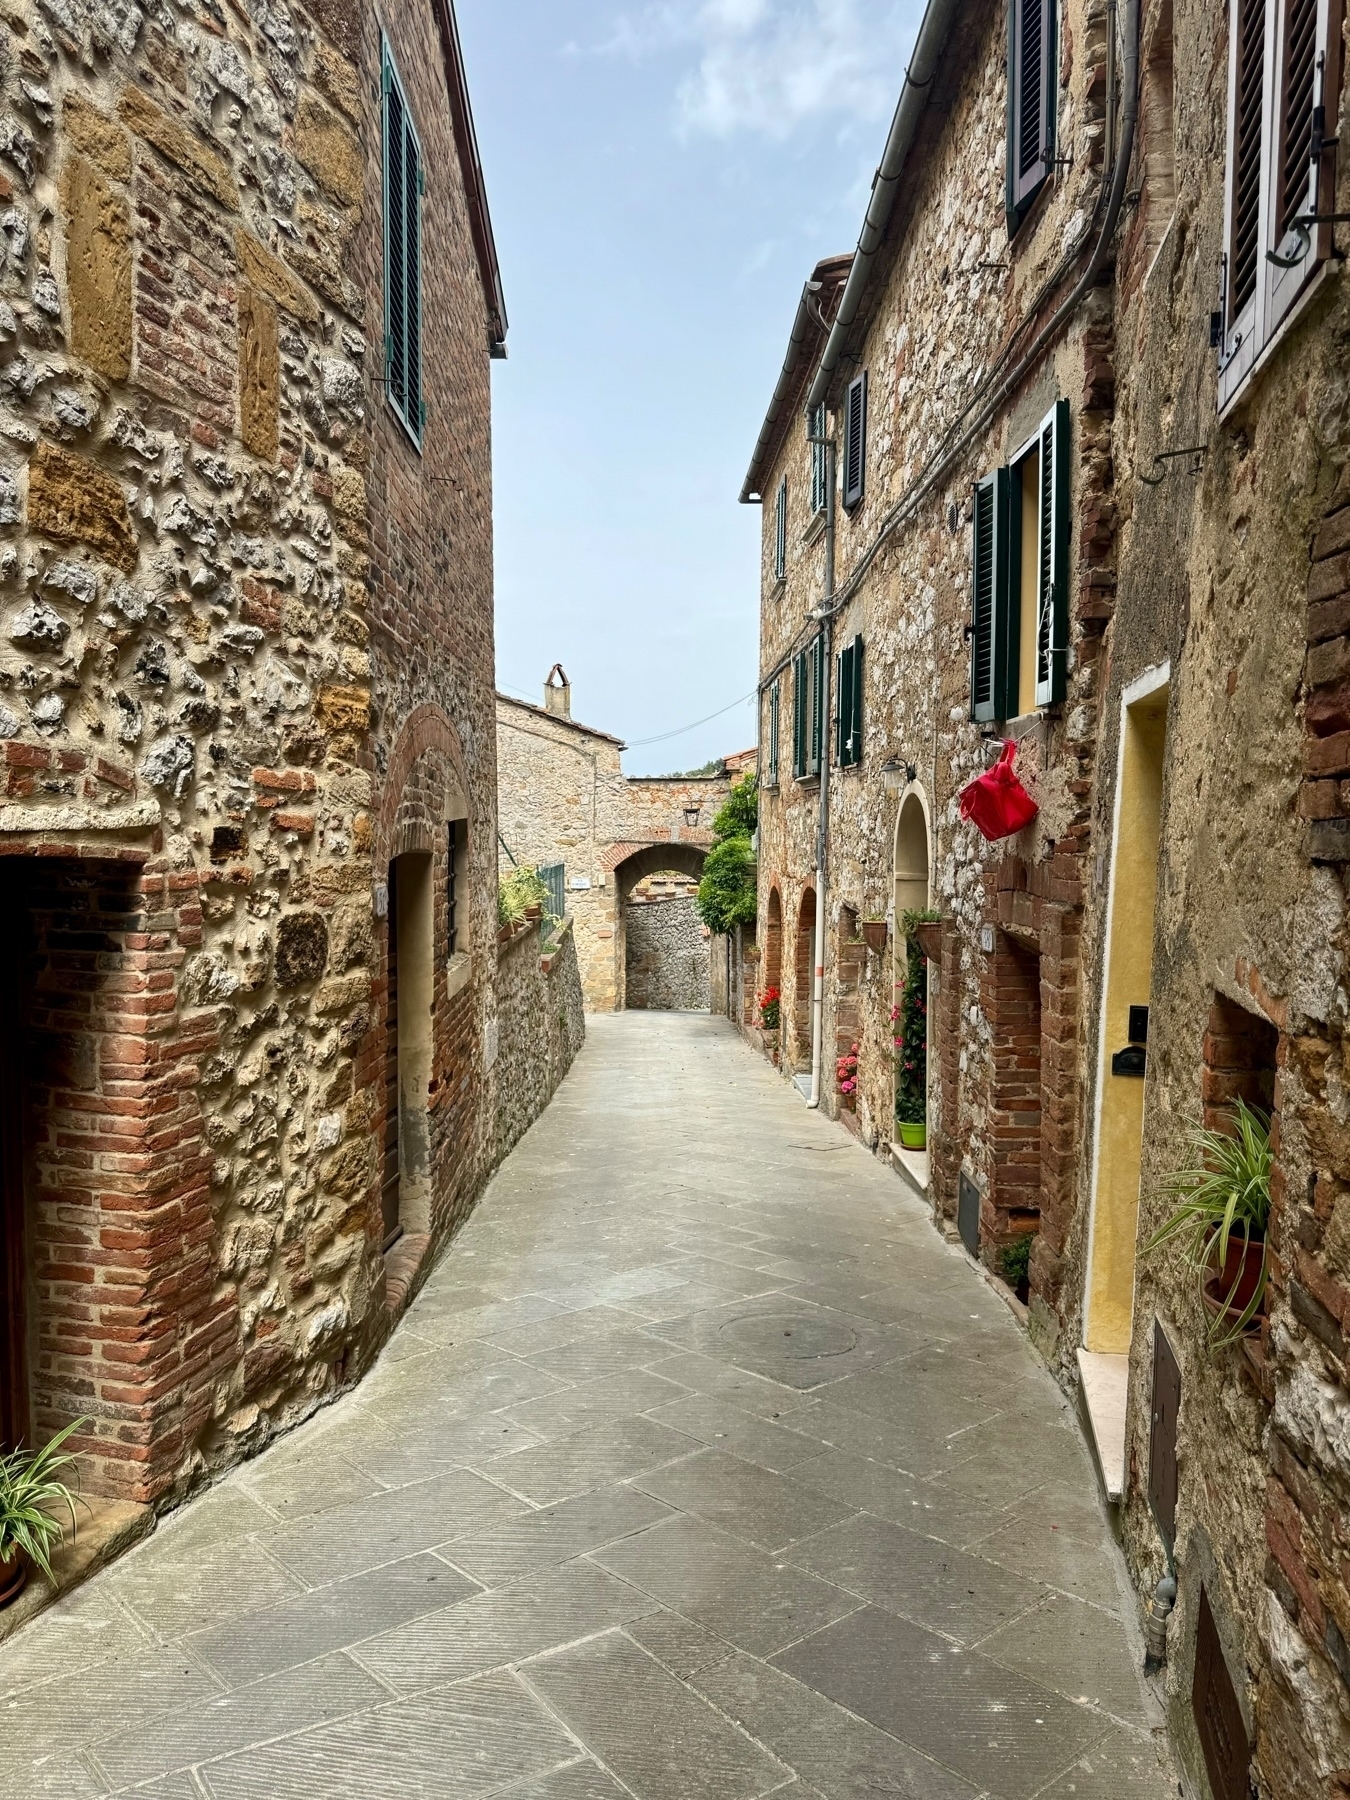 A narrow cobblestone alleyway lined with rustic stone buildings featuring green shutters and flowering plants. The alleyway curves gently with an archway visible in the distance under a partly cloudy sky.